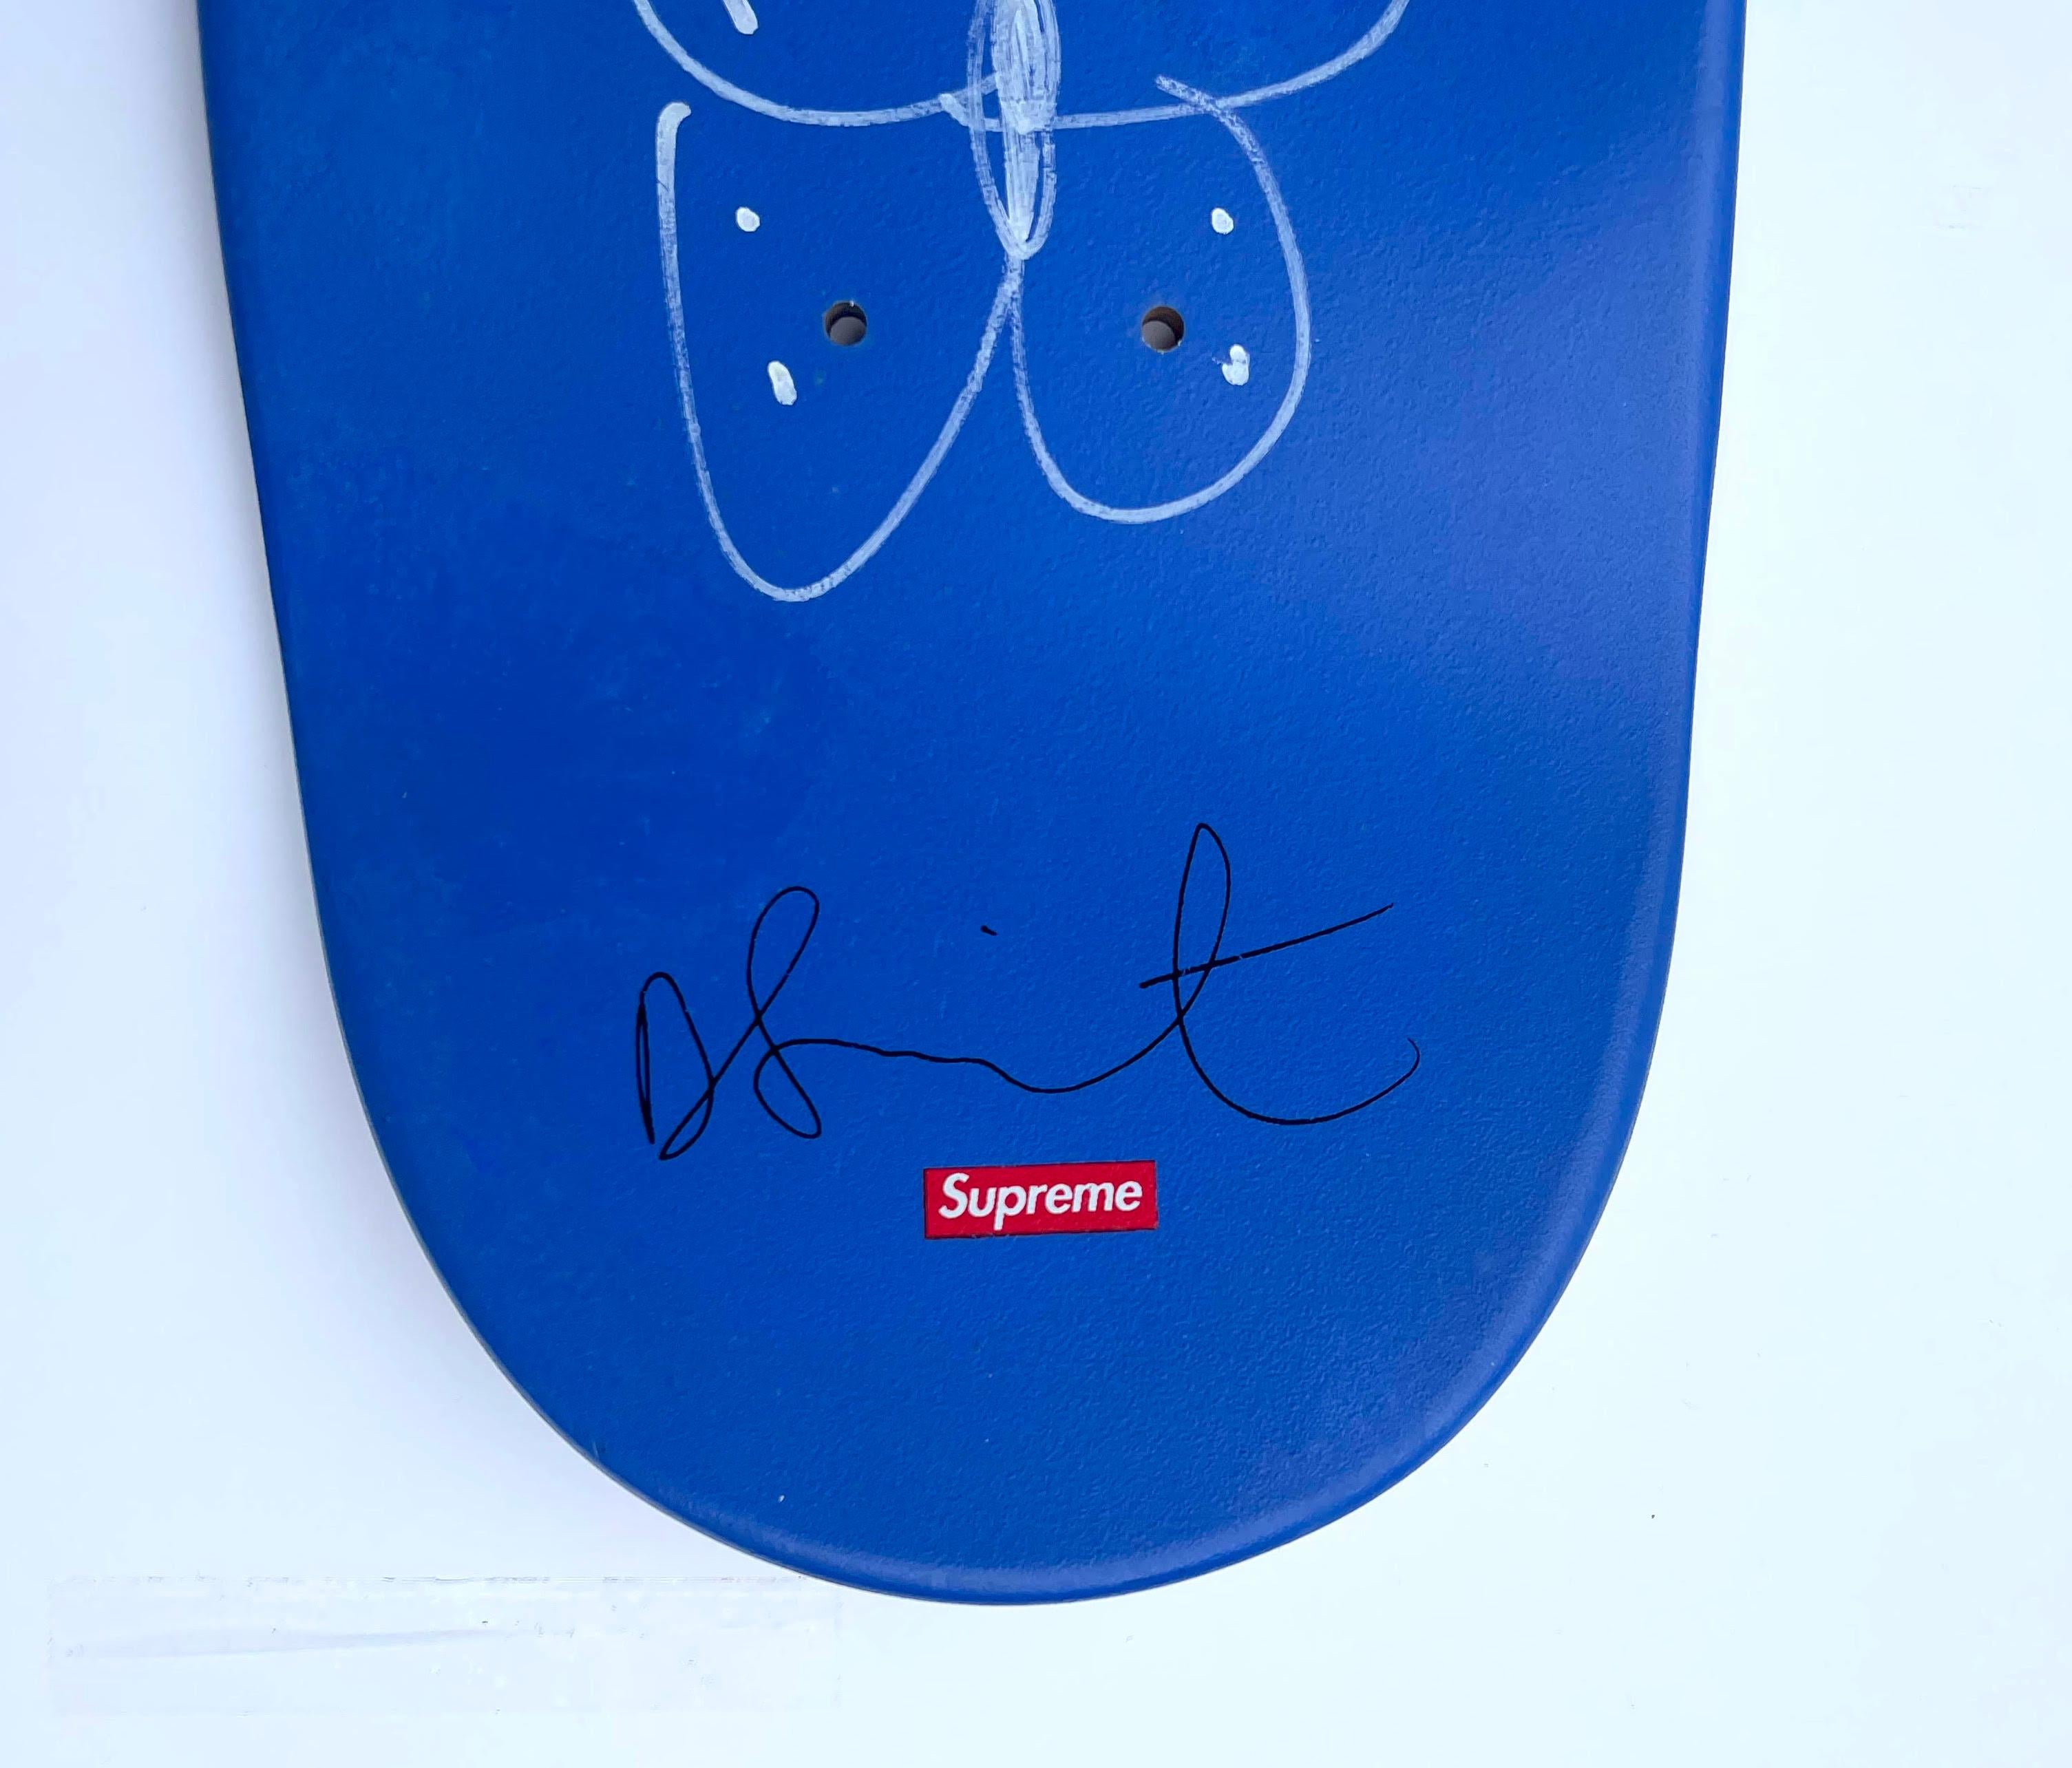 Butterfly Skull: Original hand signed drawing on limited edition Spin skateboard - Pop Art Mixed Media Art by Damien Hirst